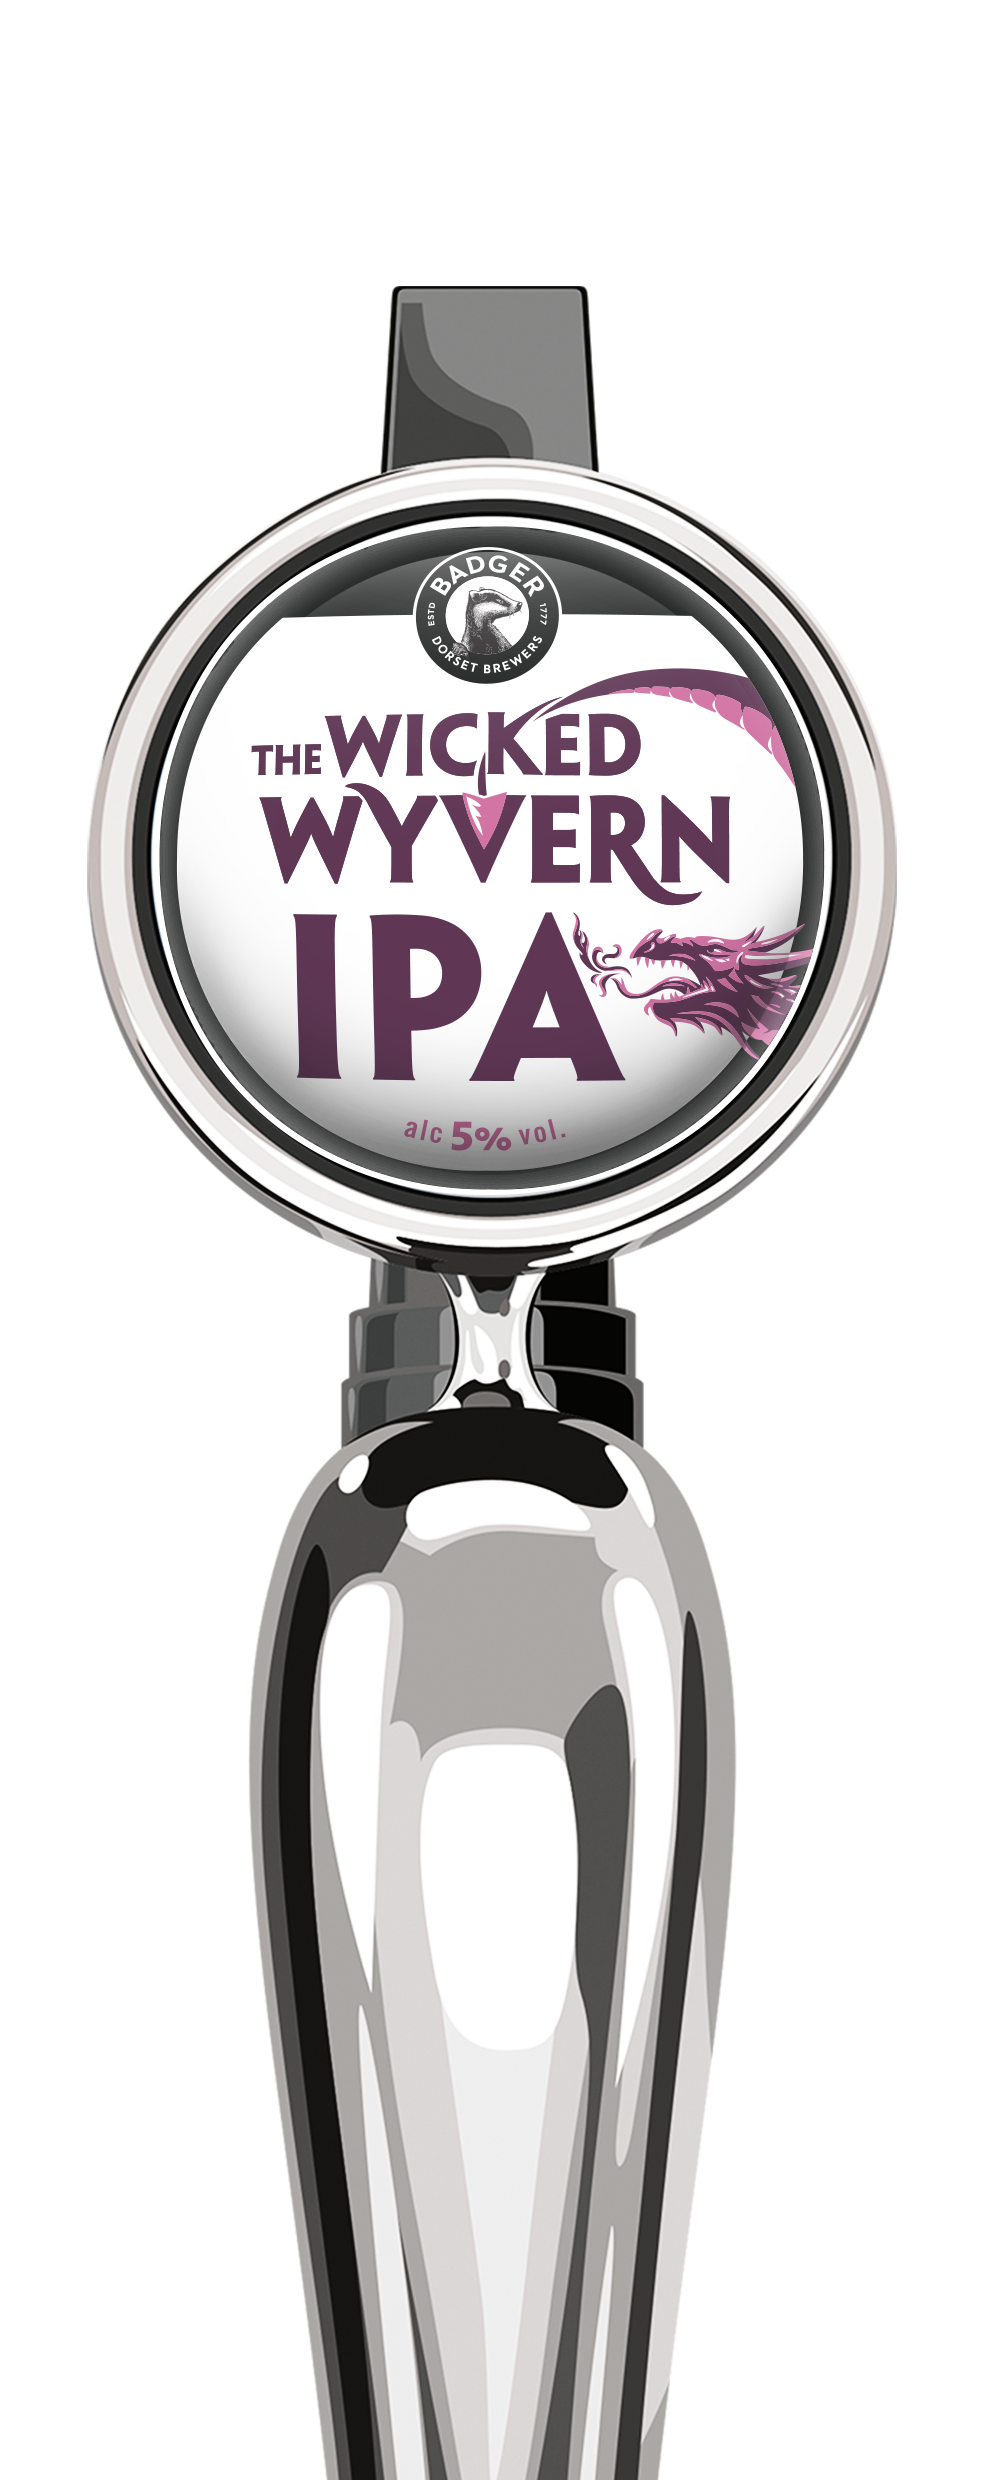 The Wicked Wyvern Pump